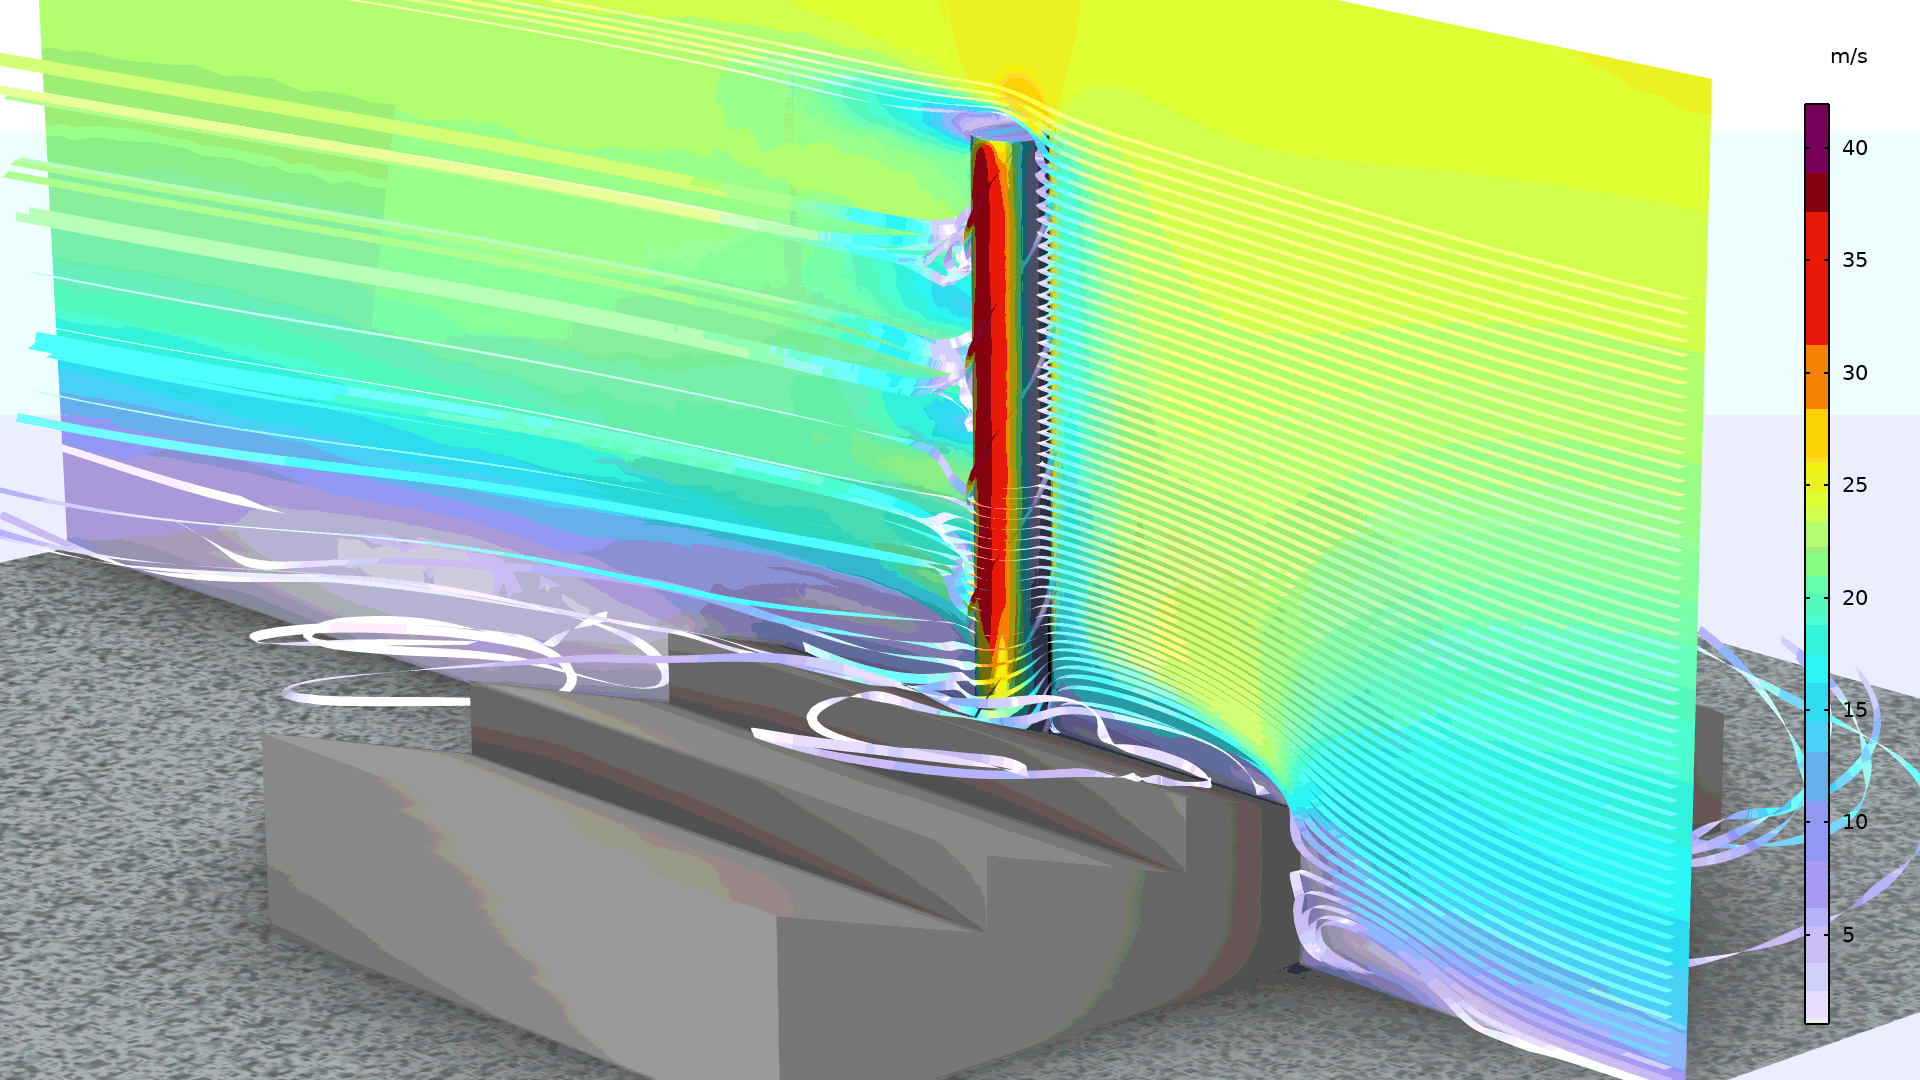 A chimney model showing the turbulent flow in the Prism color table.